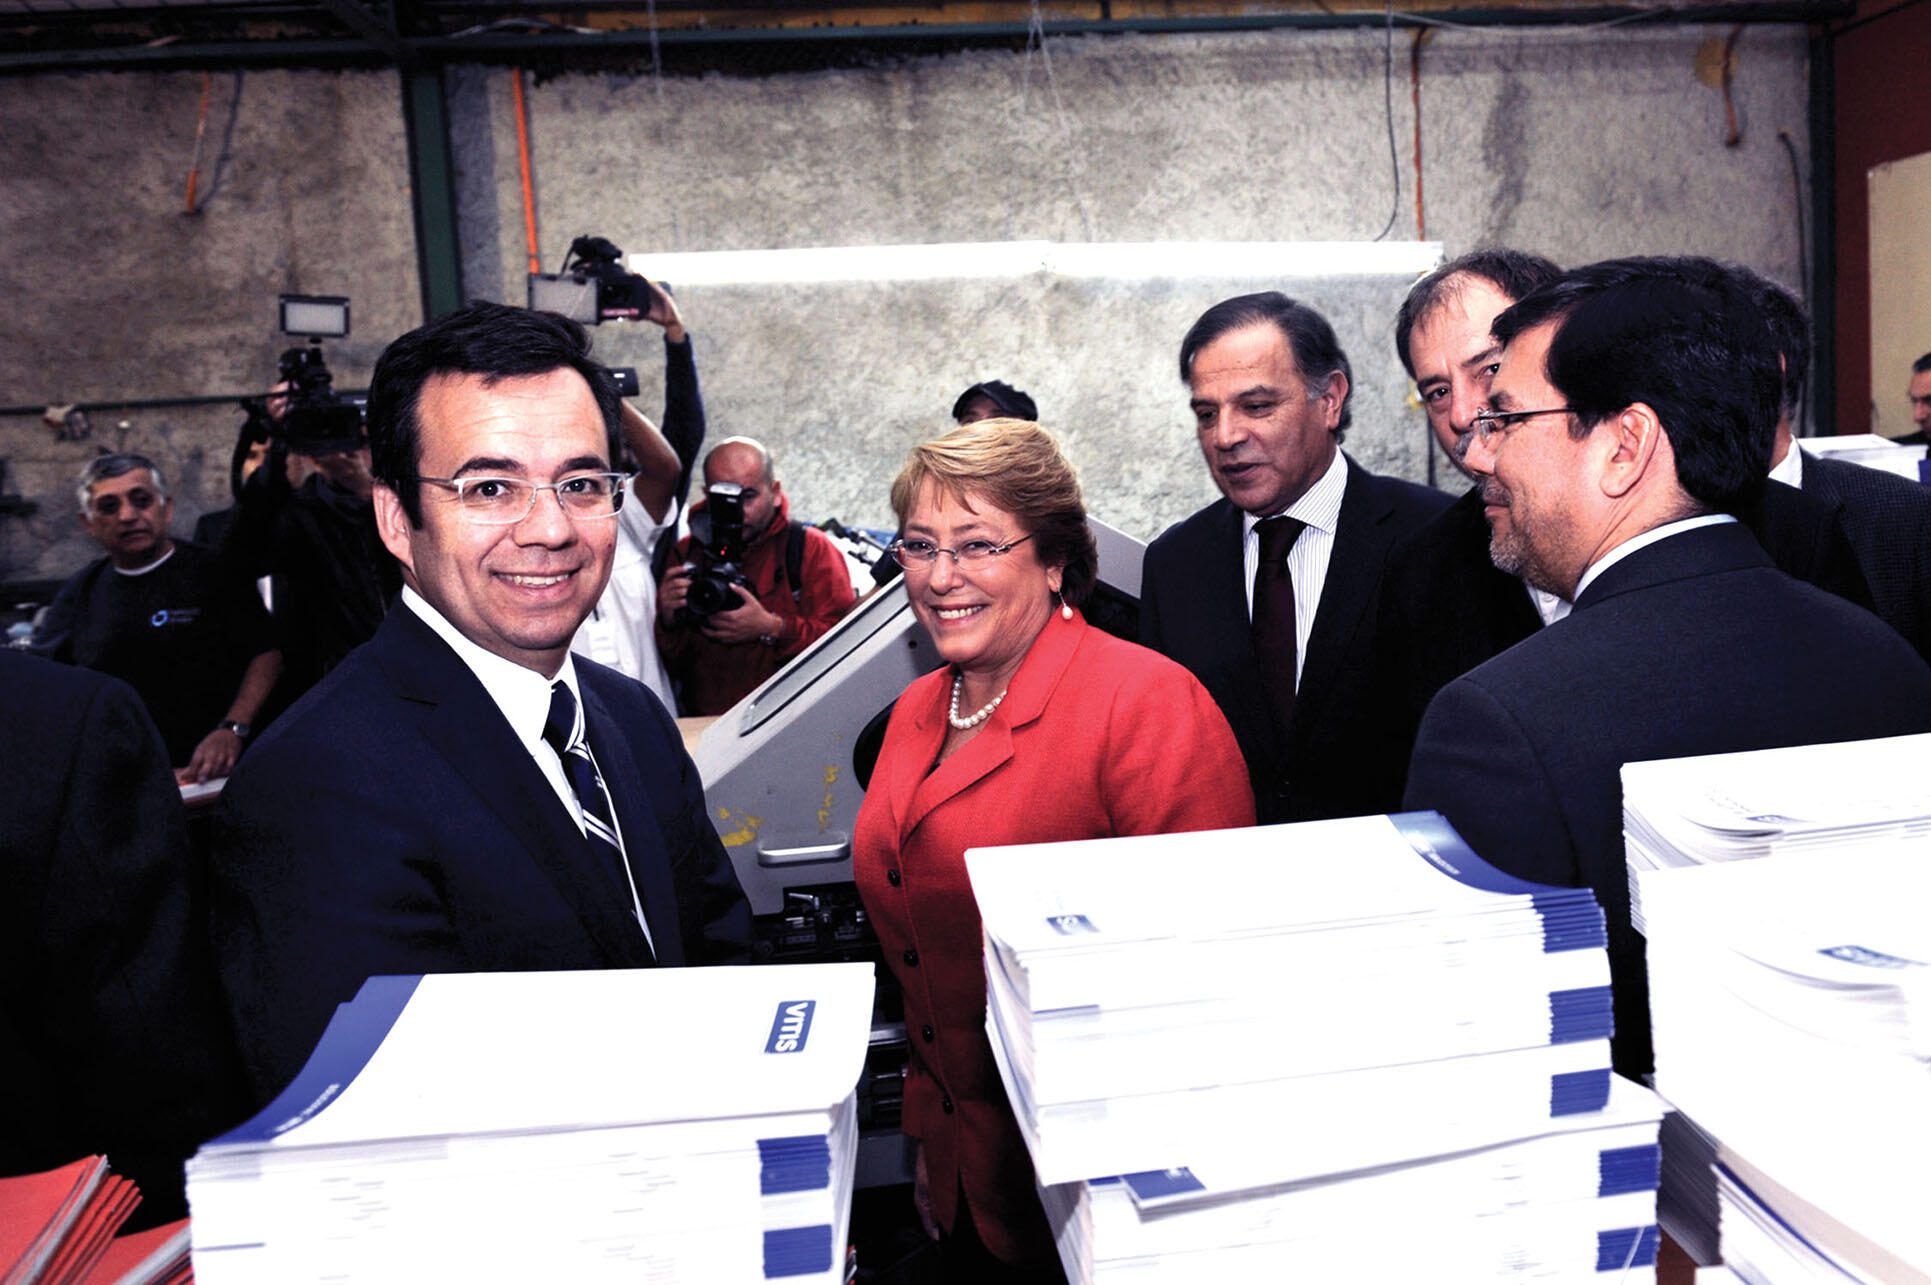 Luis Felipe Céspedes, minister of economy (far left), President Michelle Bachelet (center),  and Alberto Arenas de Mesa, minister of finance (far right) promote the benefits of the Chilean tax reform. (Photo from the Chilean Ministry of the Economy.)